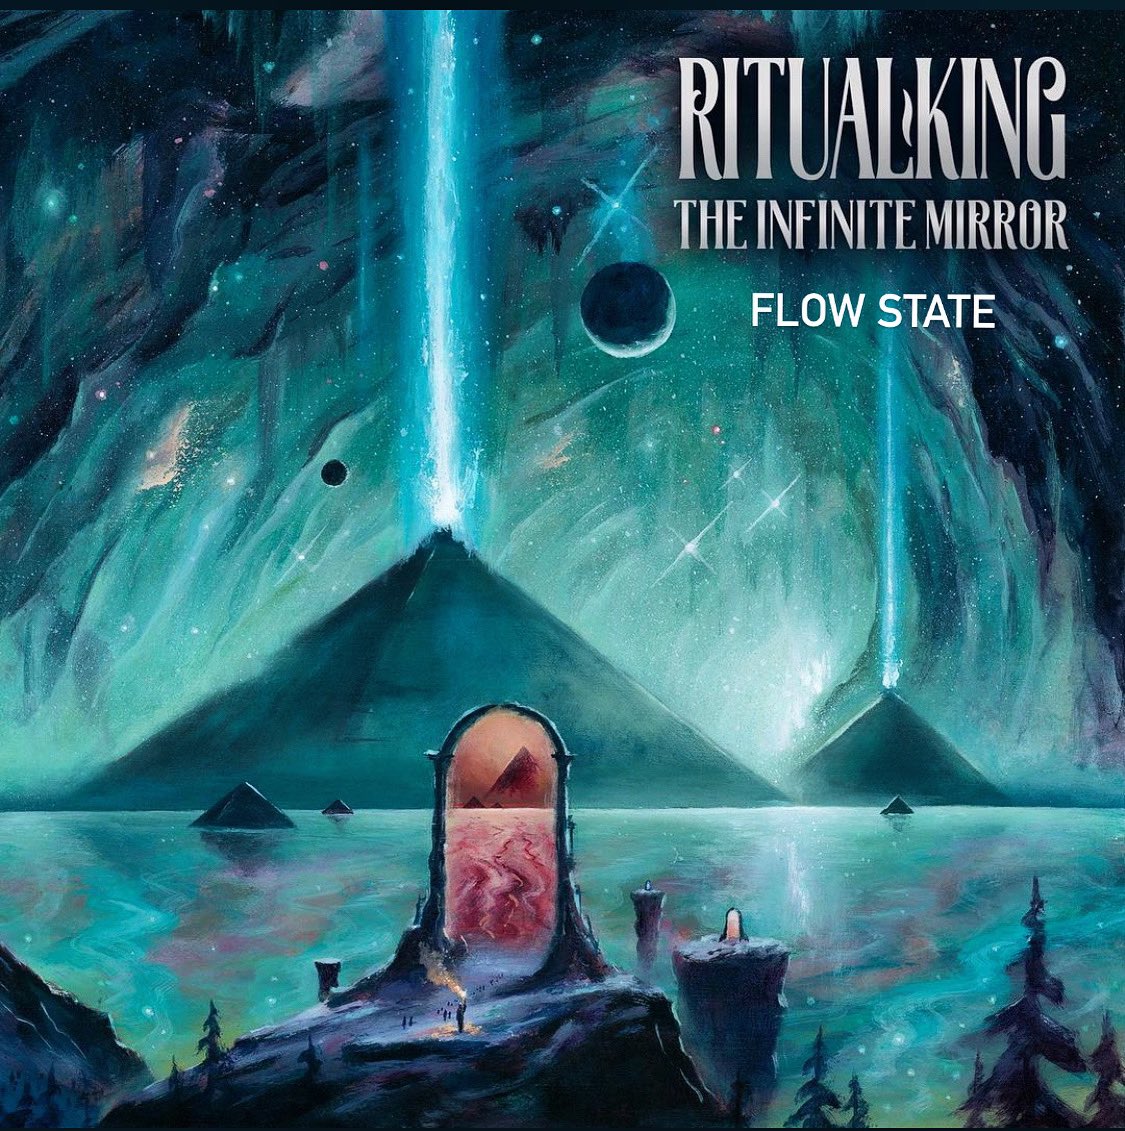 🔥Ritual King “Flow State” Diö’s Sunday Special 🍳 @ritualkinguk youtu.be/Y5COwEOJqko?si… #outlawsofrock #undergroundmusic #altrock #stonerrock #epictrack #indiemusic #musicians #listentothis #bands #nopayola #supportindiemusic #newtracks #newmusic #sundayspecial #bigbeers 🍺